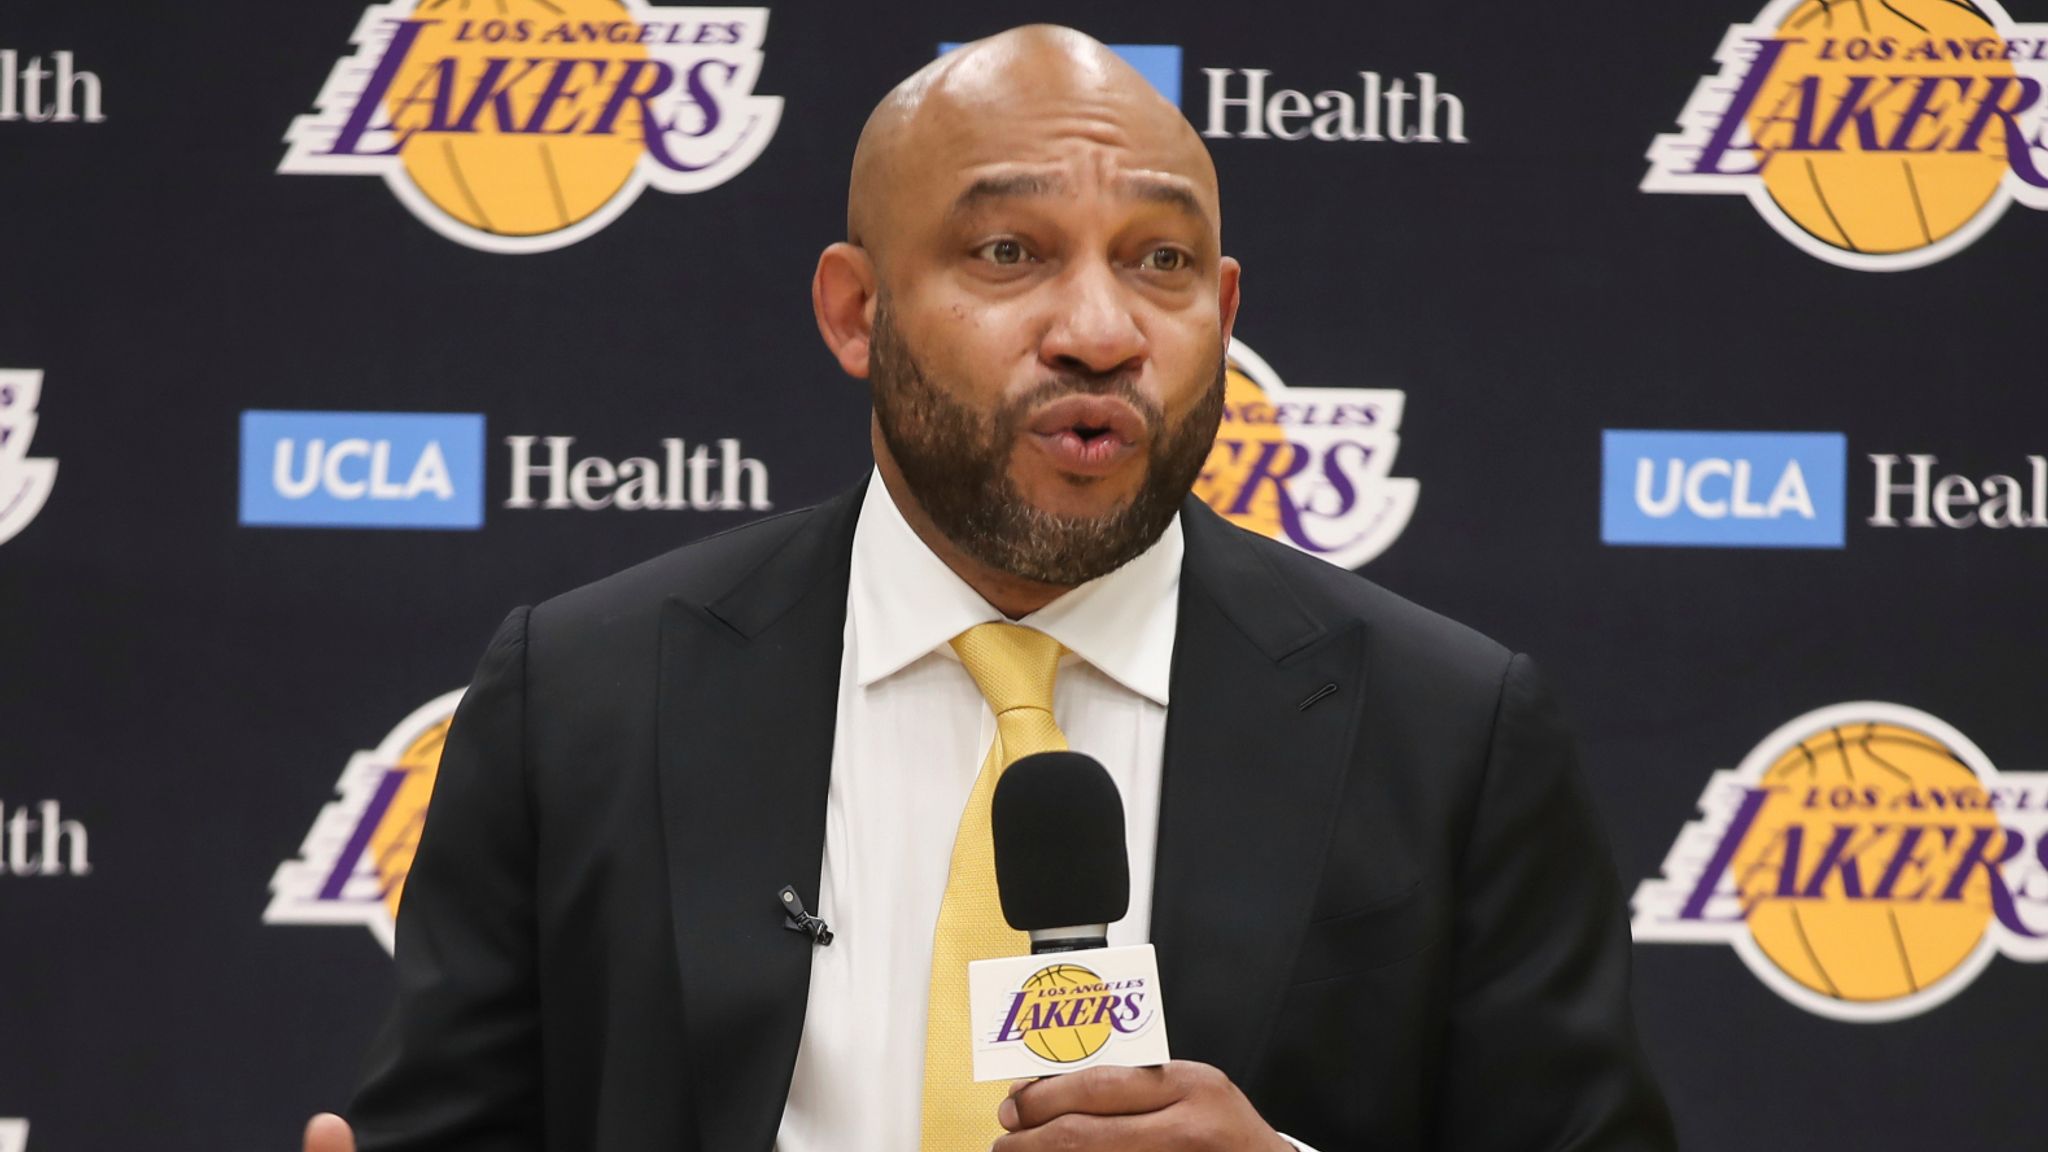 Darvin Ham: Los Angeles Lakers' new head coach impresses in media unveiling  as he outlines franchise turnaround plan | NBA News | Sky Sports